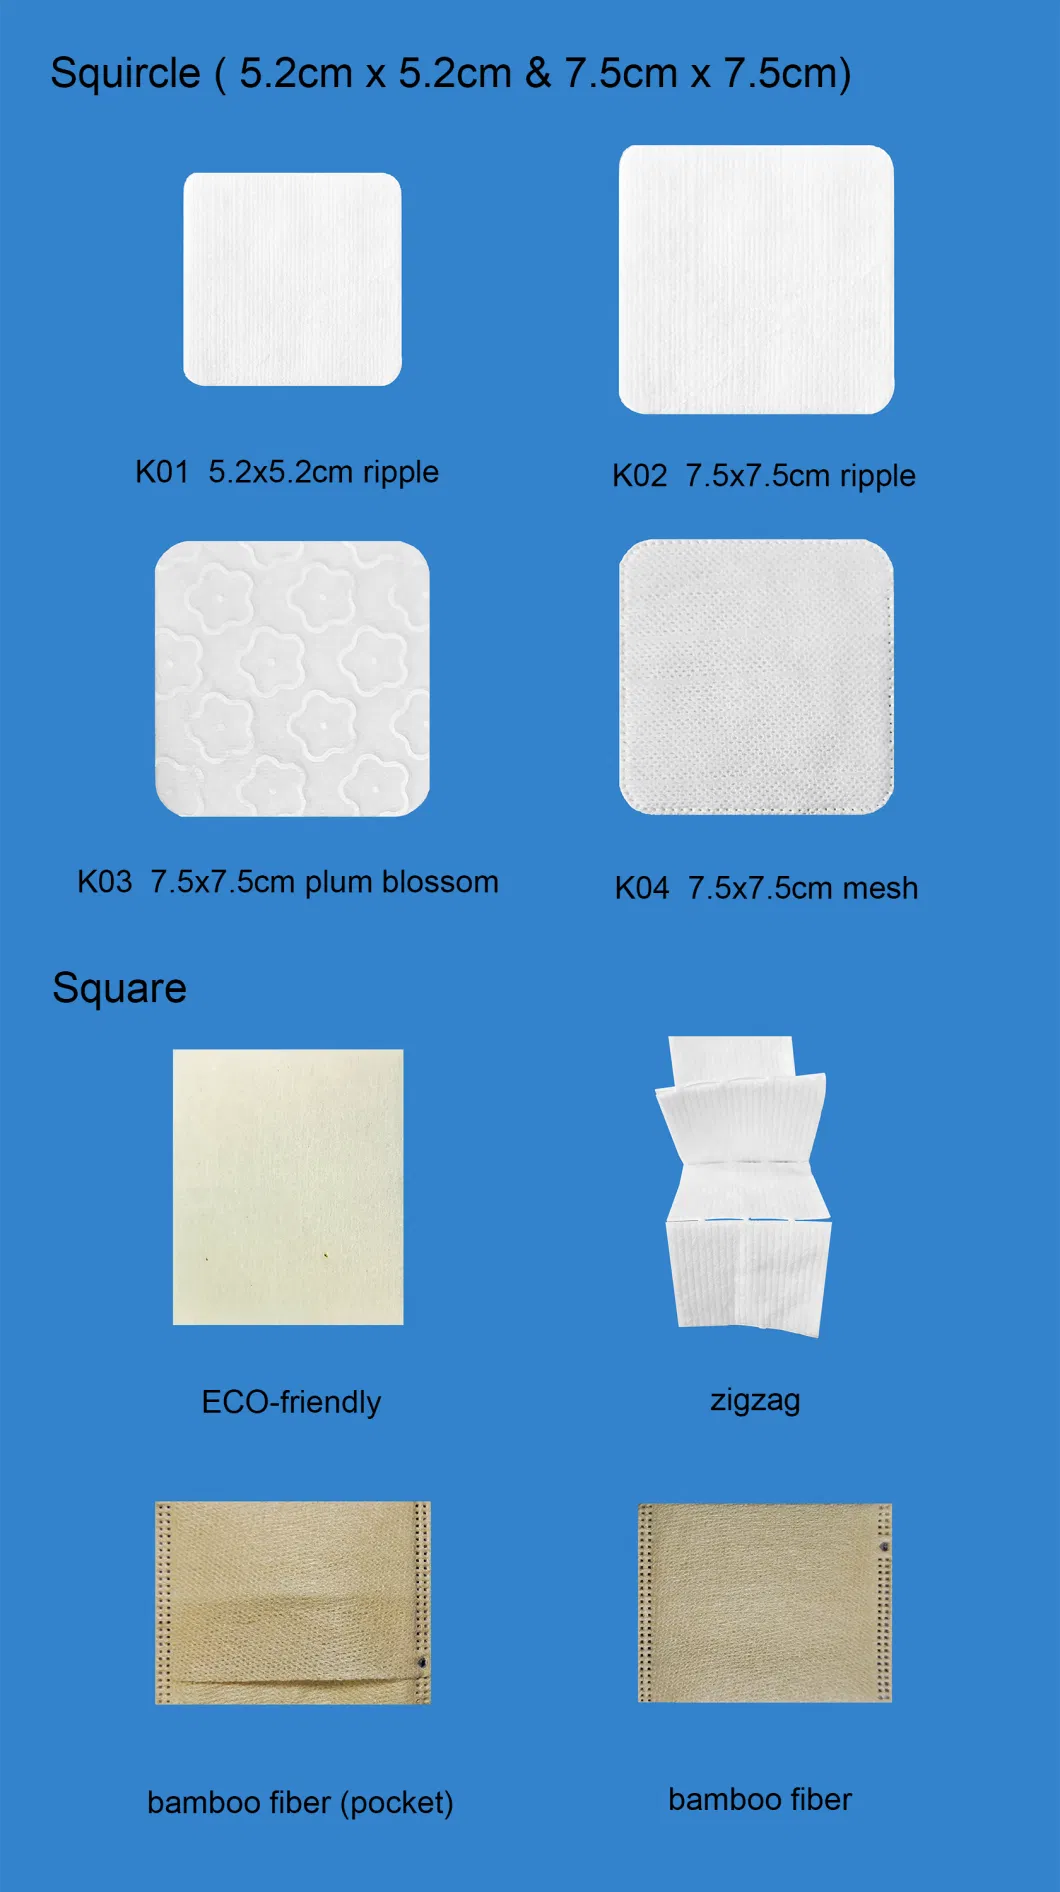 Premium Exfoliate Function Distinct Raised Textured Surface Super Soft Absorbent Hypoallergenic Lint Free Fluffy Durable Biodegradable and Disposable Cotton Pad